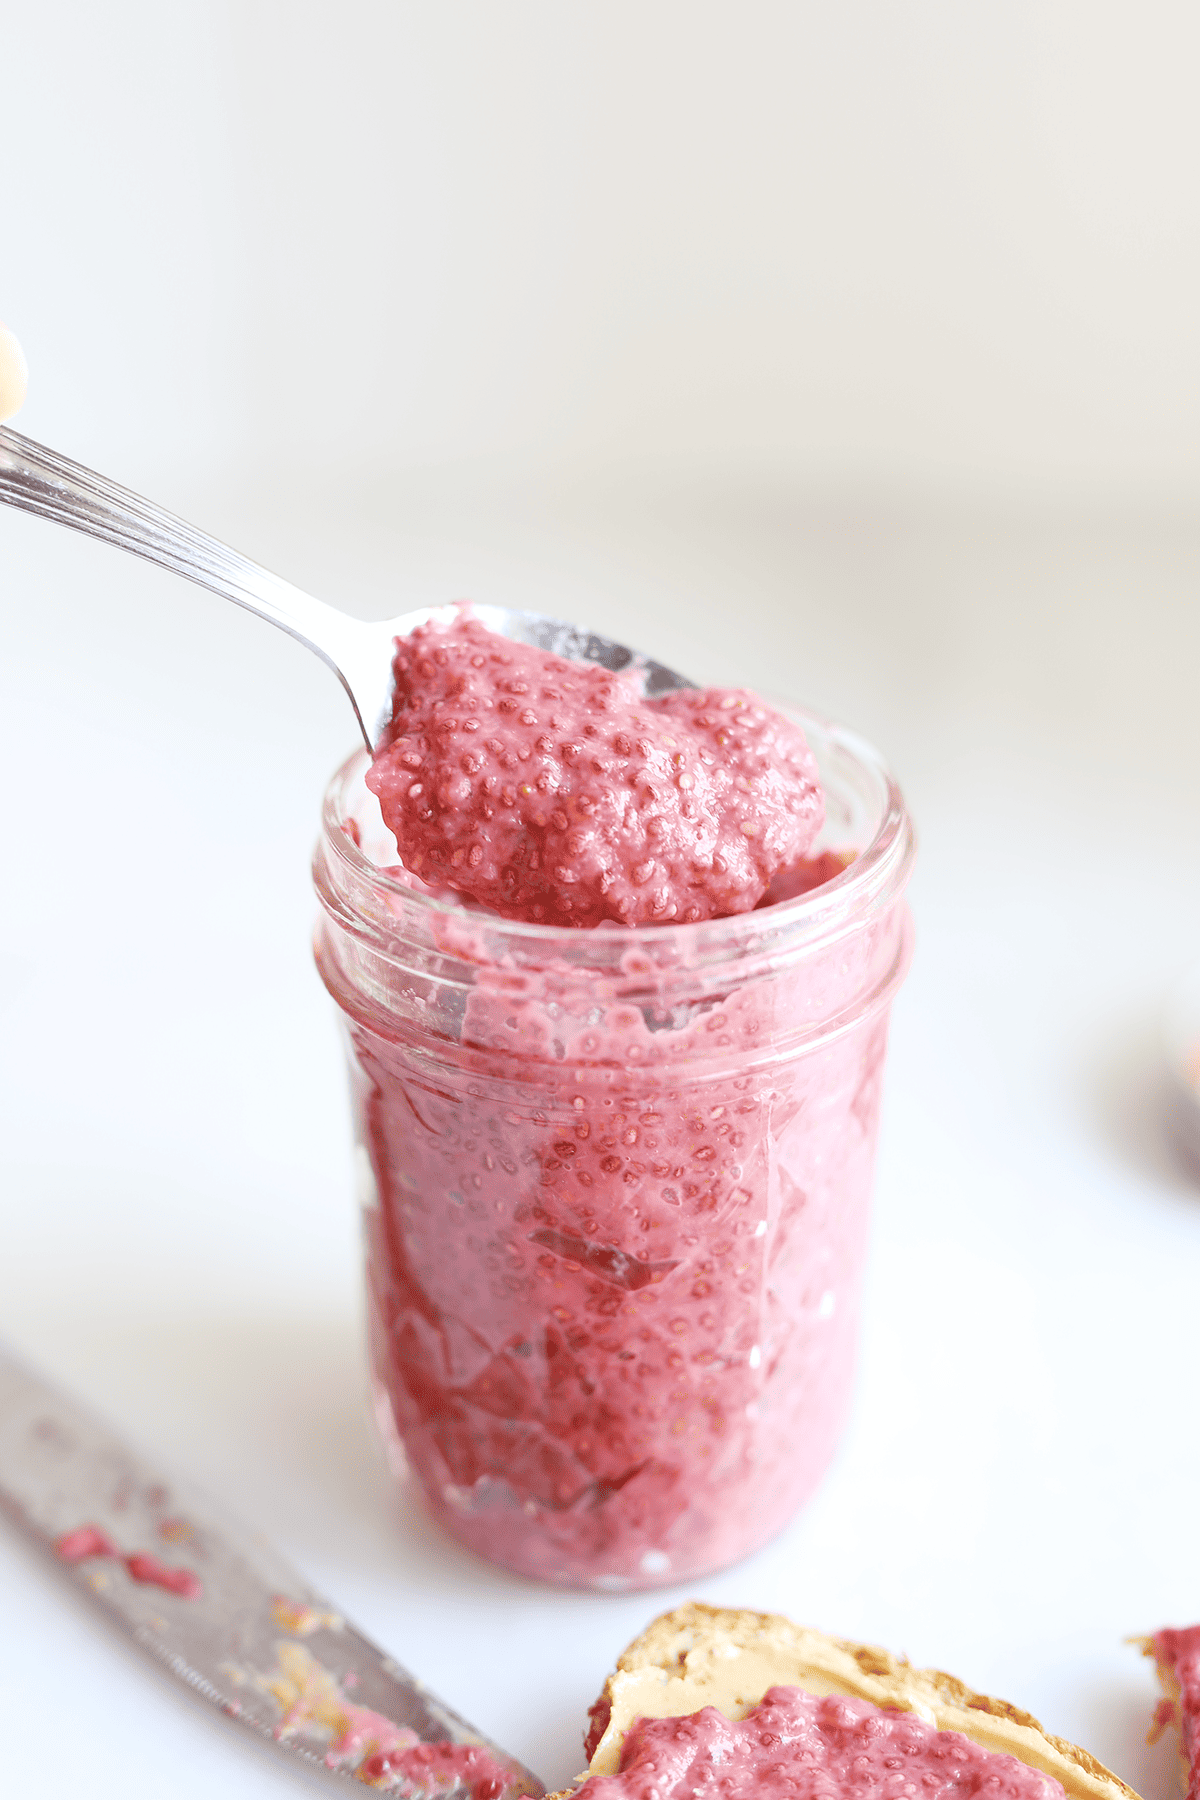 This Strawberry Chia Jam is SUPER easy to make, only requires 3 ingredients, naturally sweetened and wayyy healthier than star bought jams.